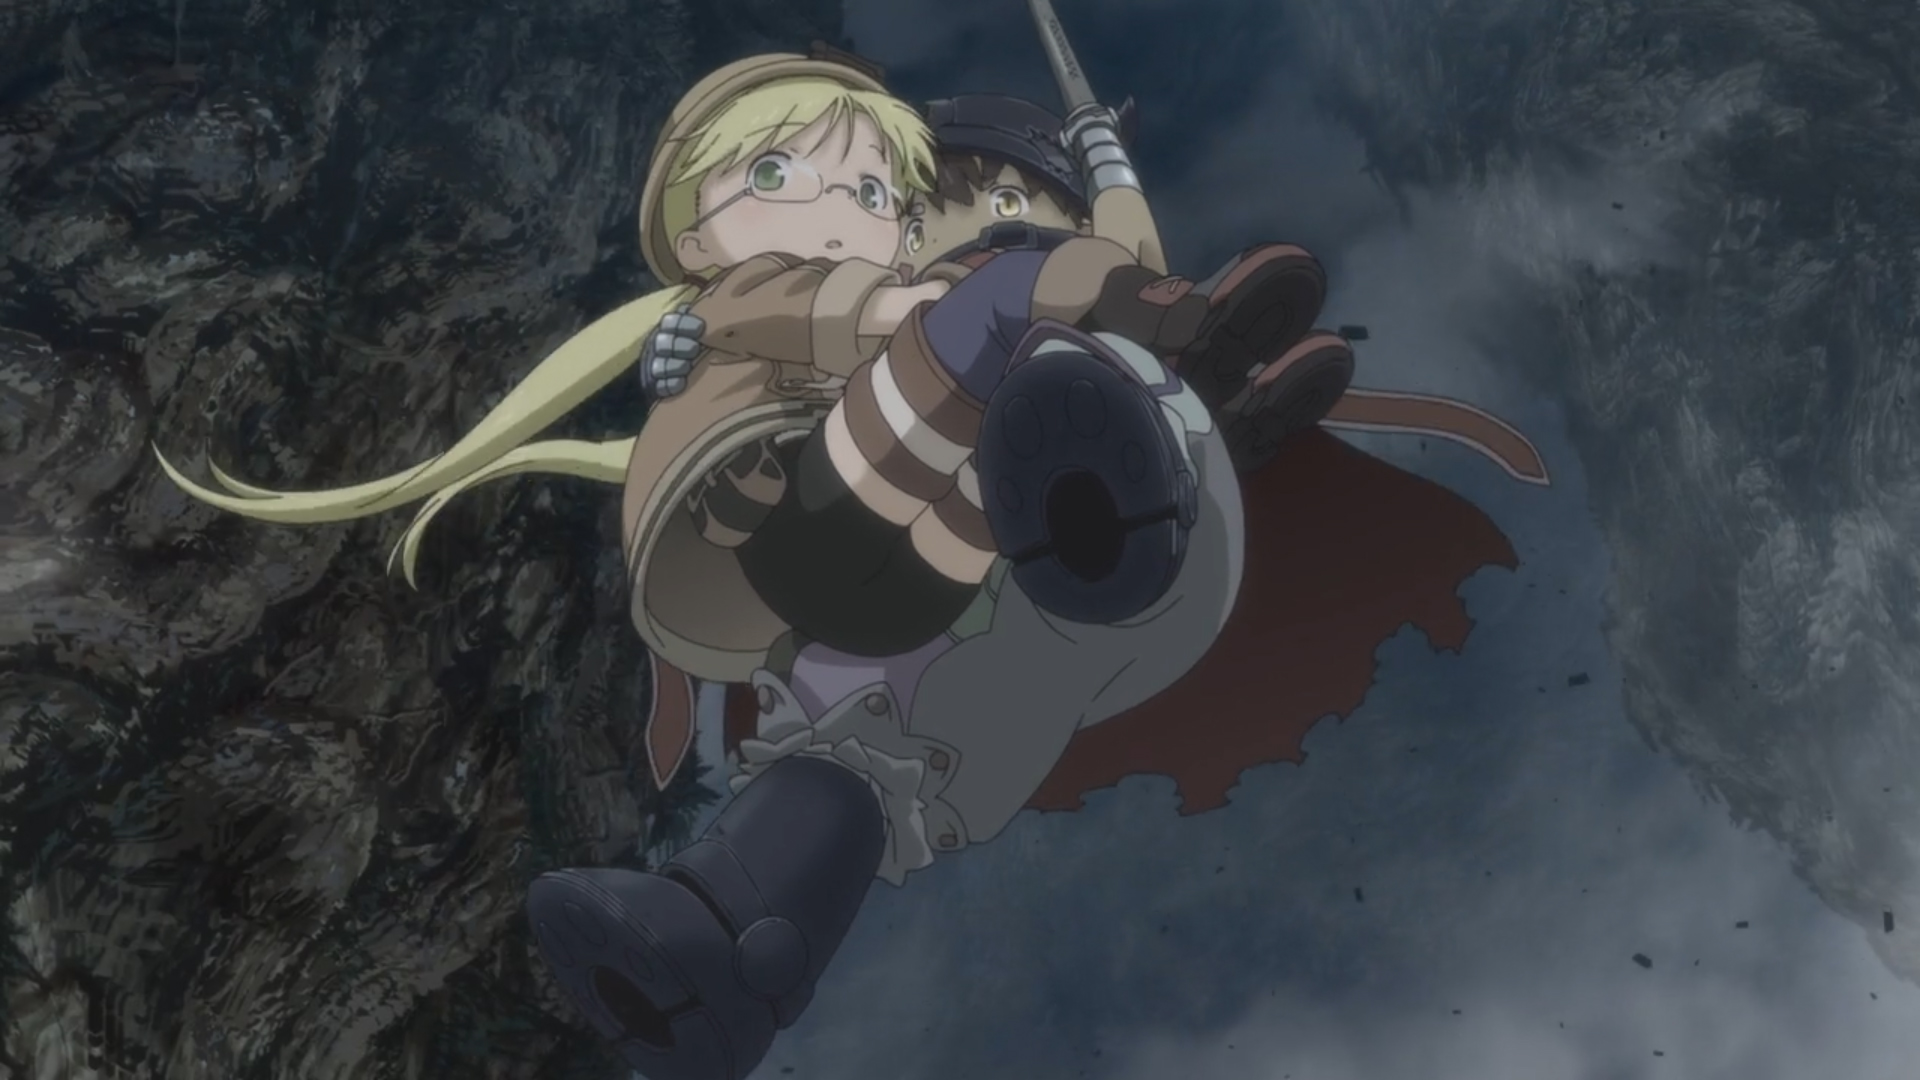 English Dub Review: Made in Abyss: Dawn of the Deep Soul